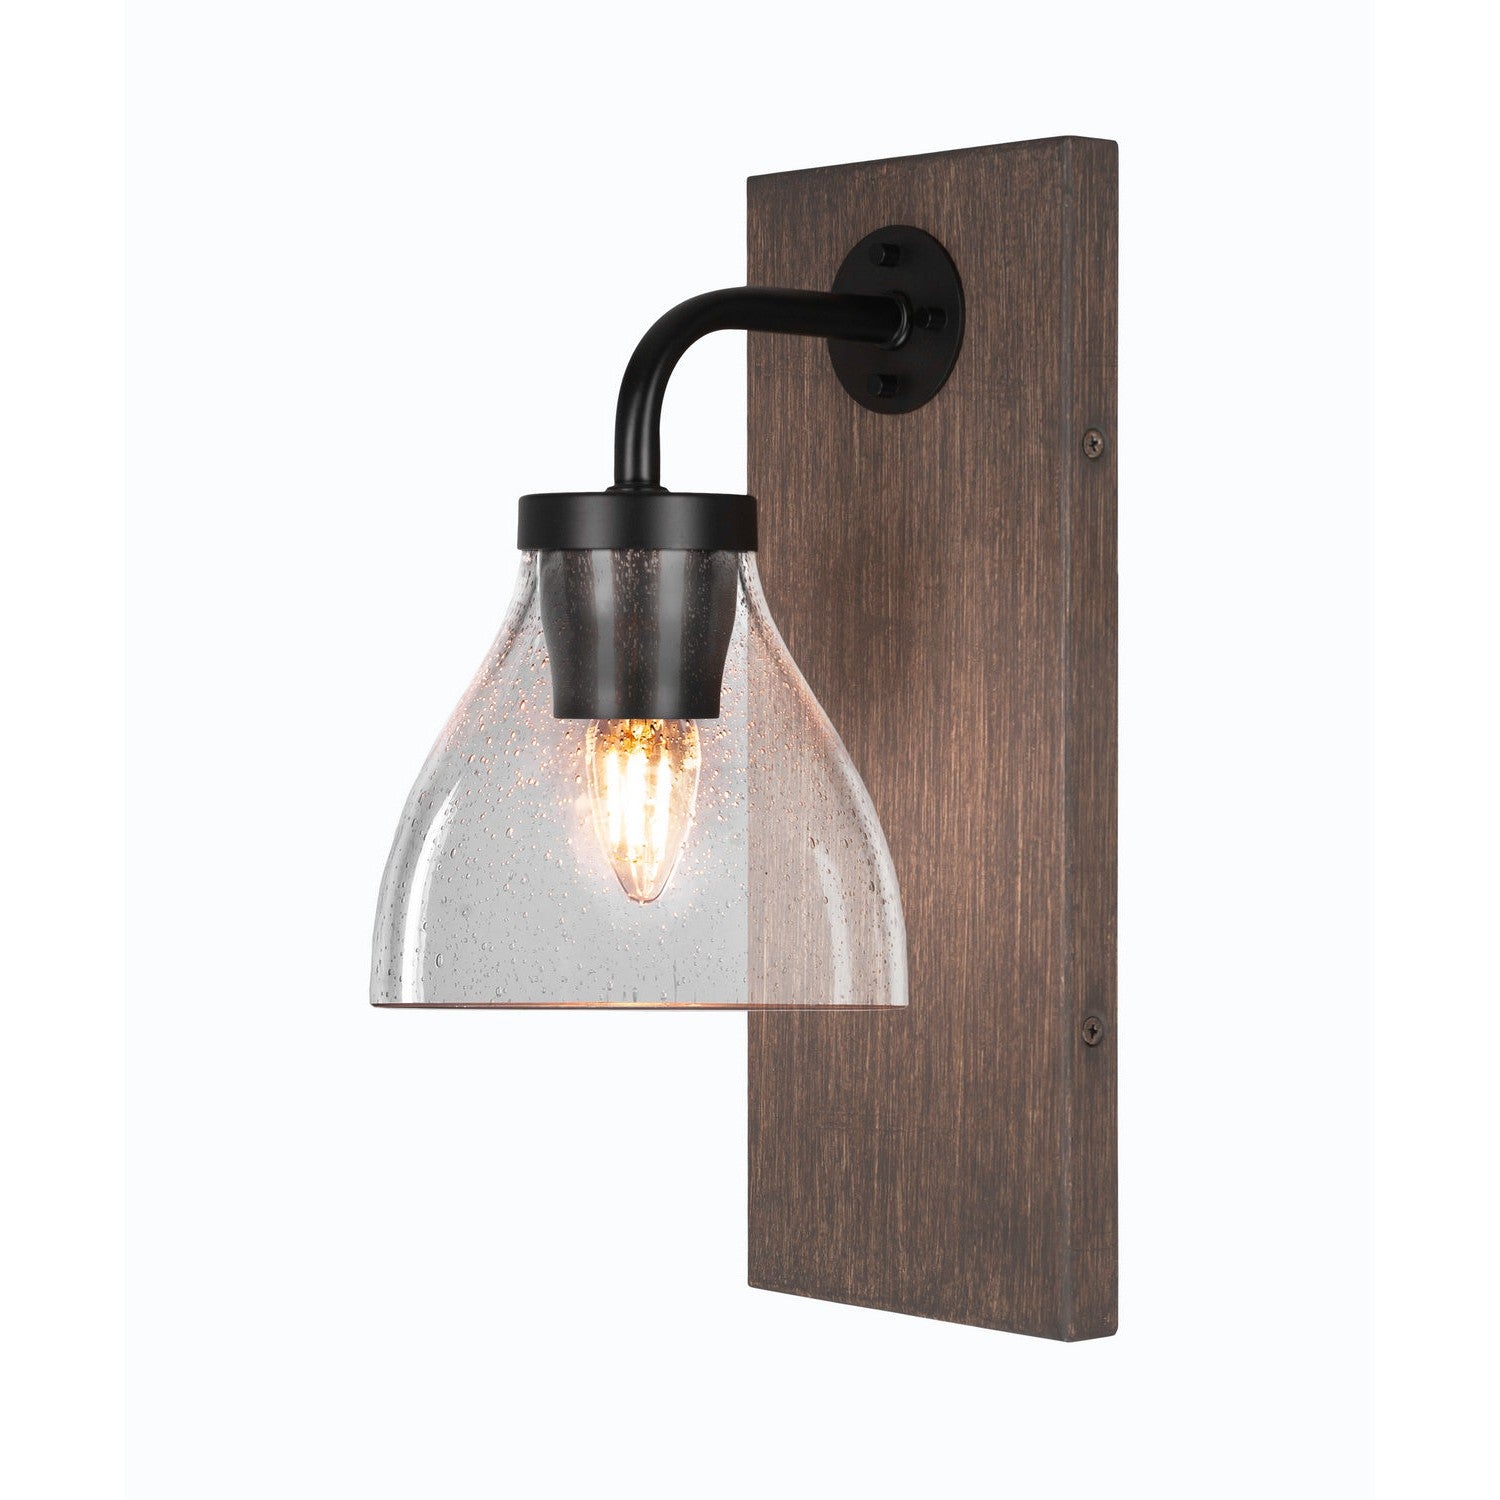 Toltec Oxbridge 1771-mbdw-4760 Wall Sconce Light - Matte Black & Painted Distressed Wood-look